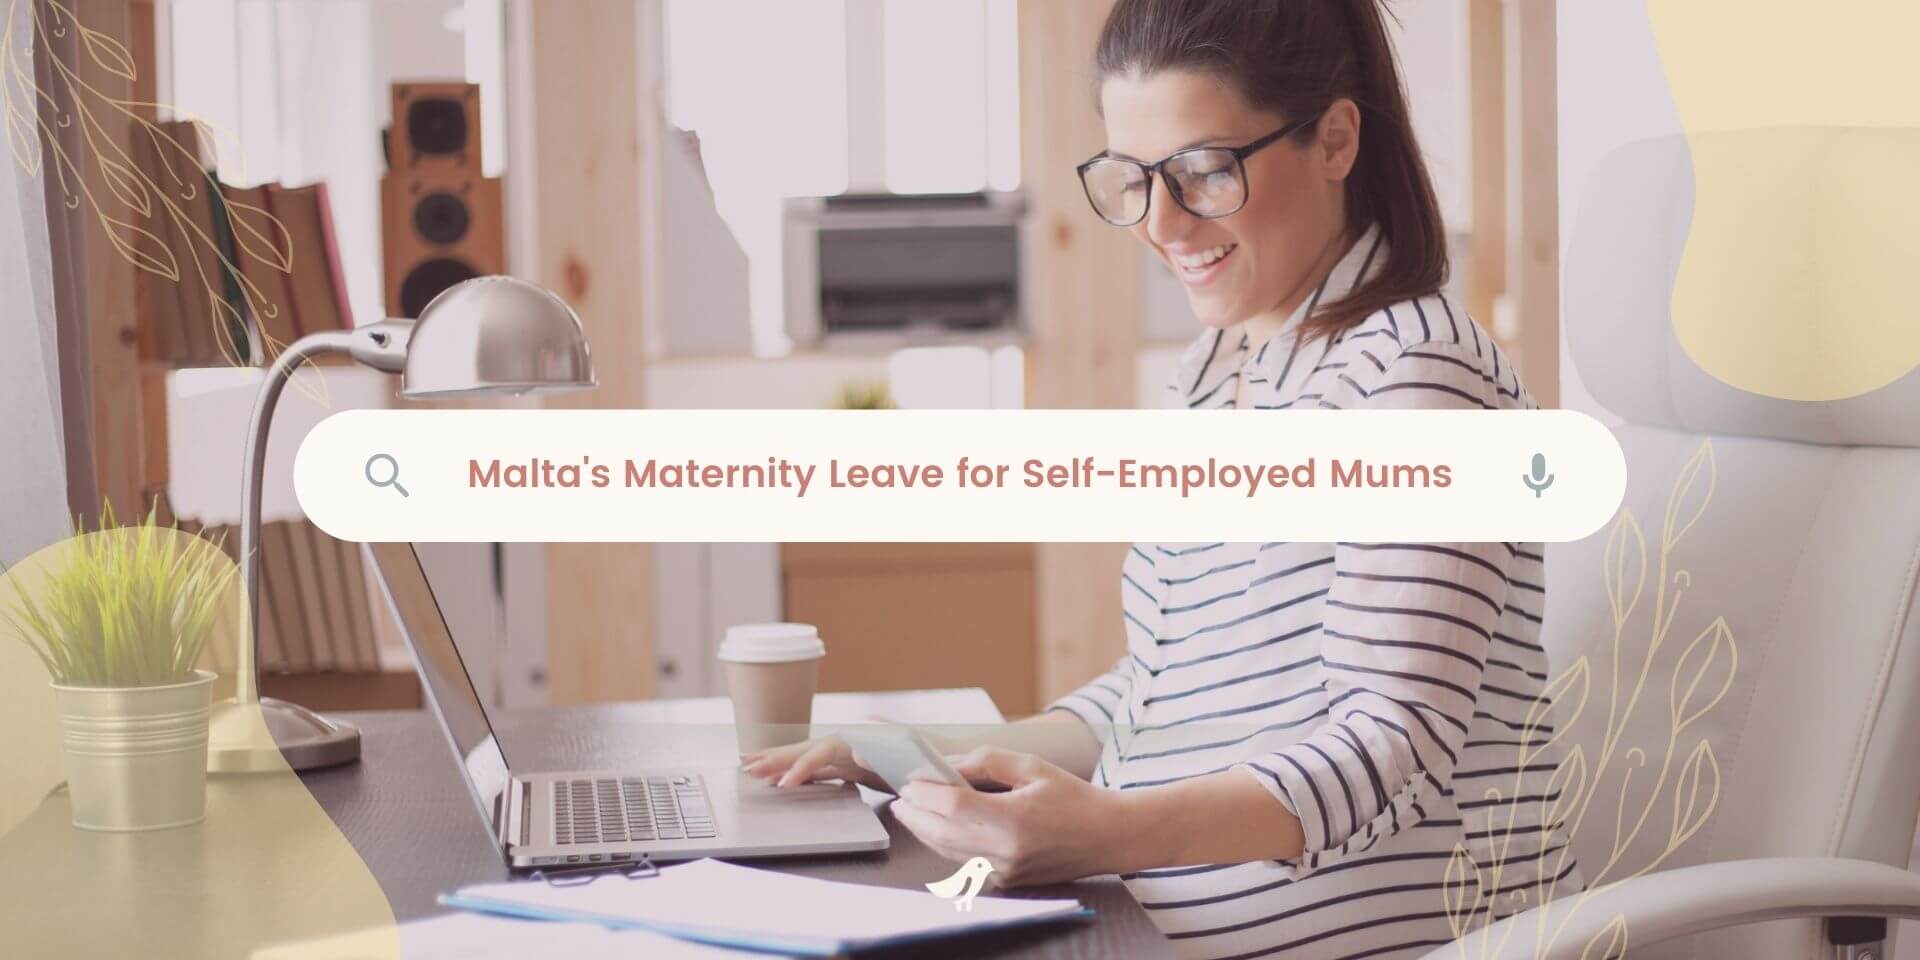 Malta's Maternity Leave for Self-Employed Mums